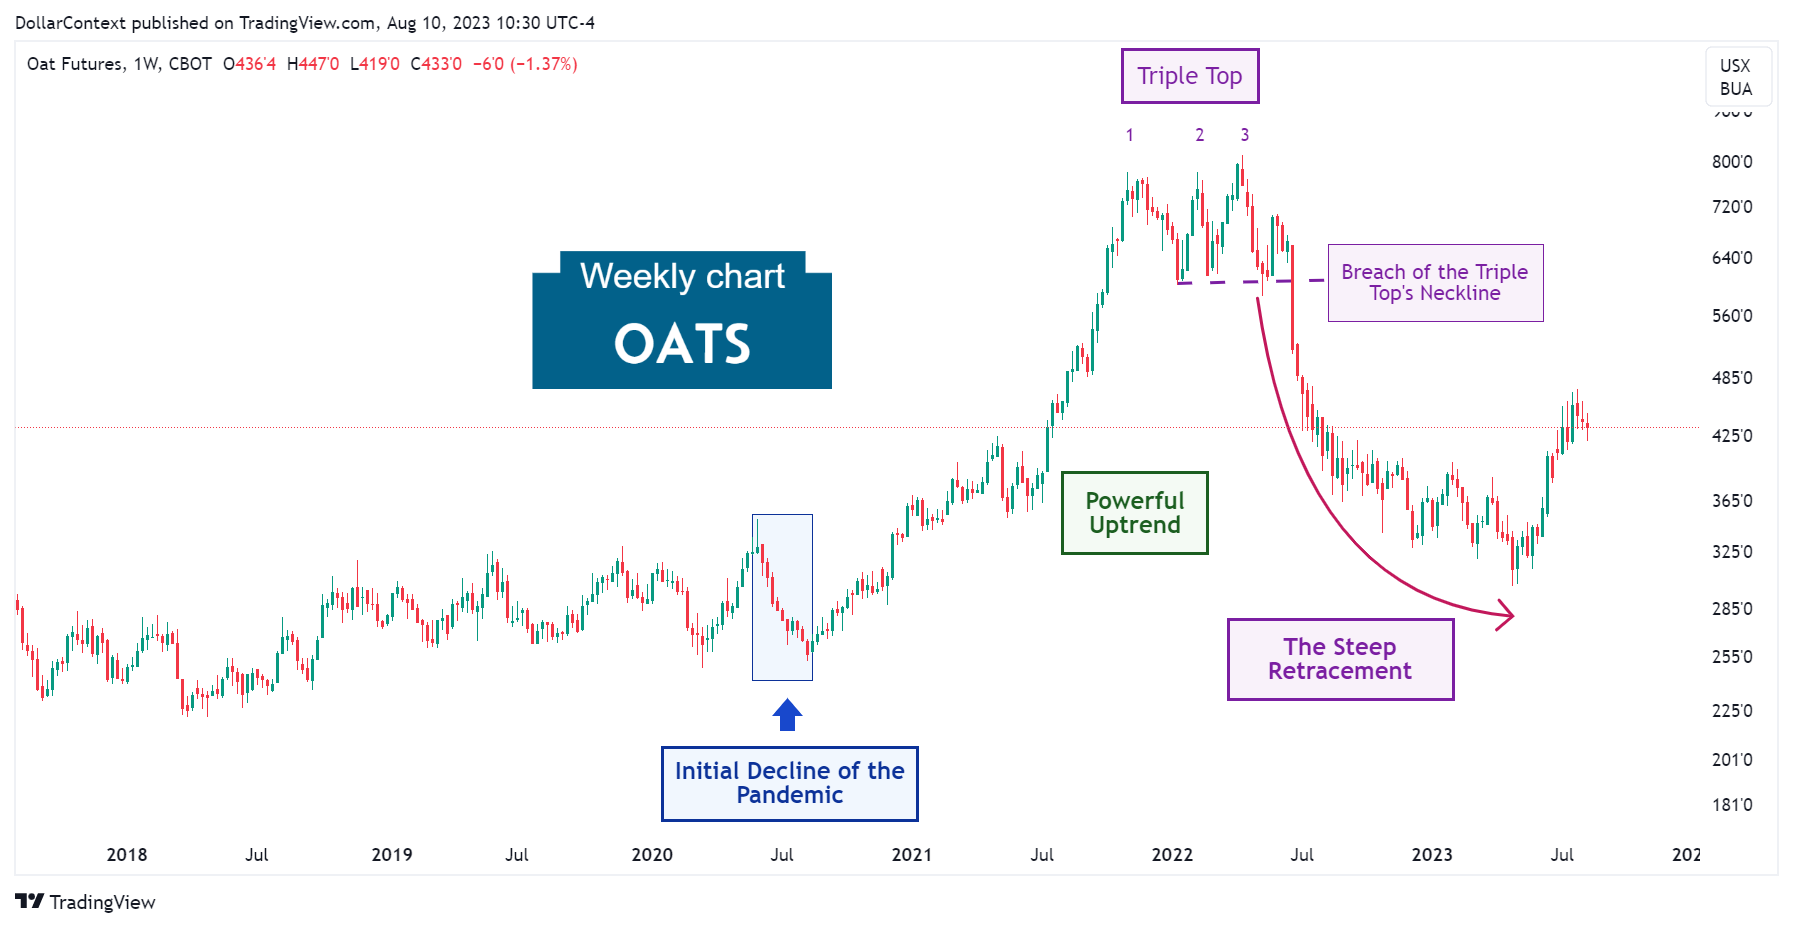 Strong Correction of the Oat Market After a Triple Top